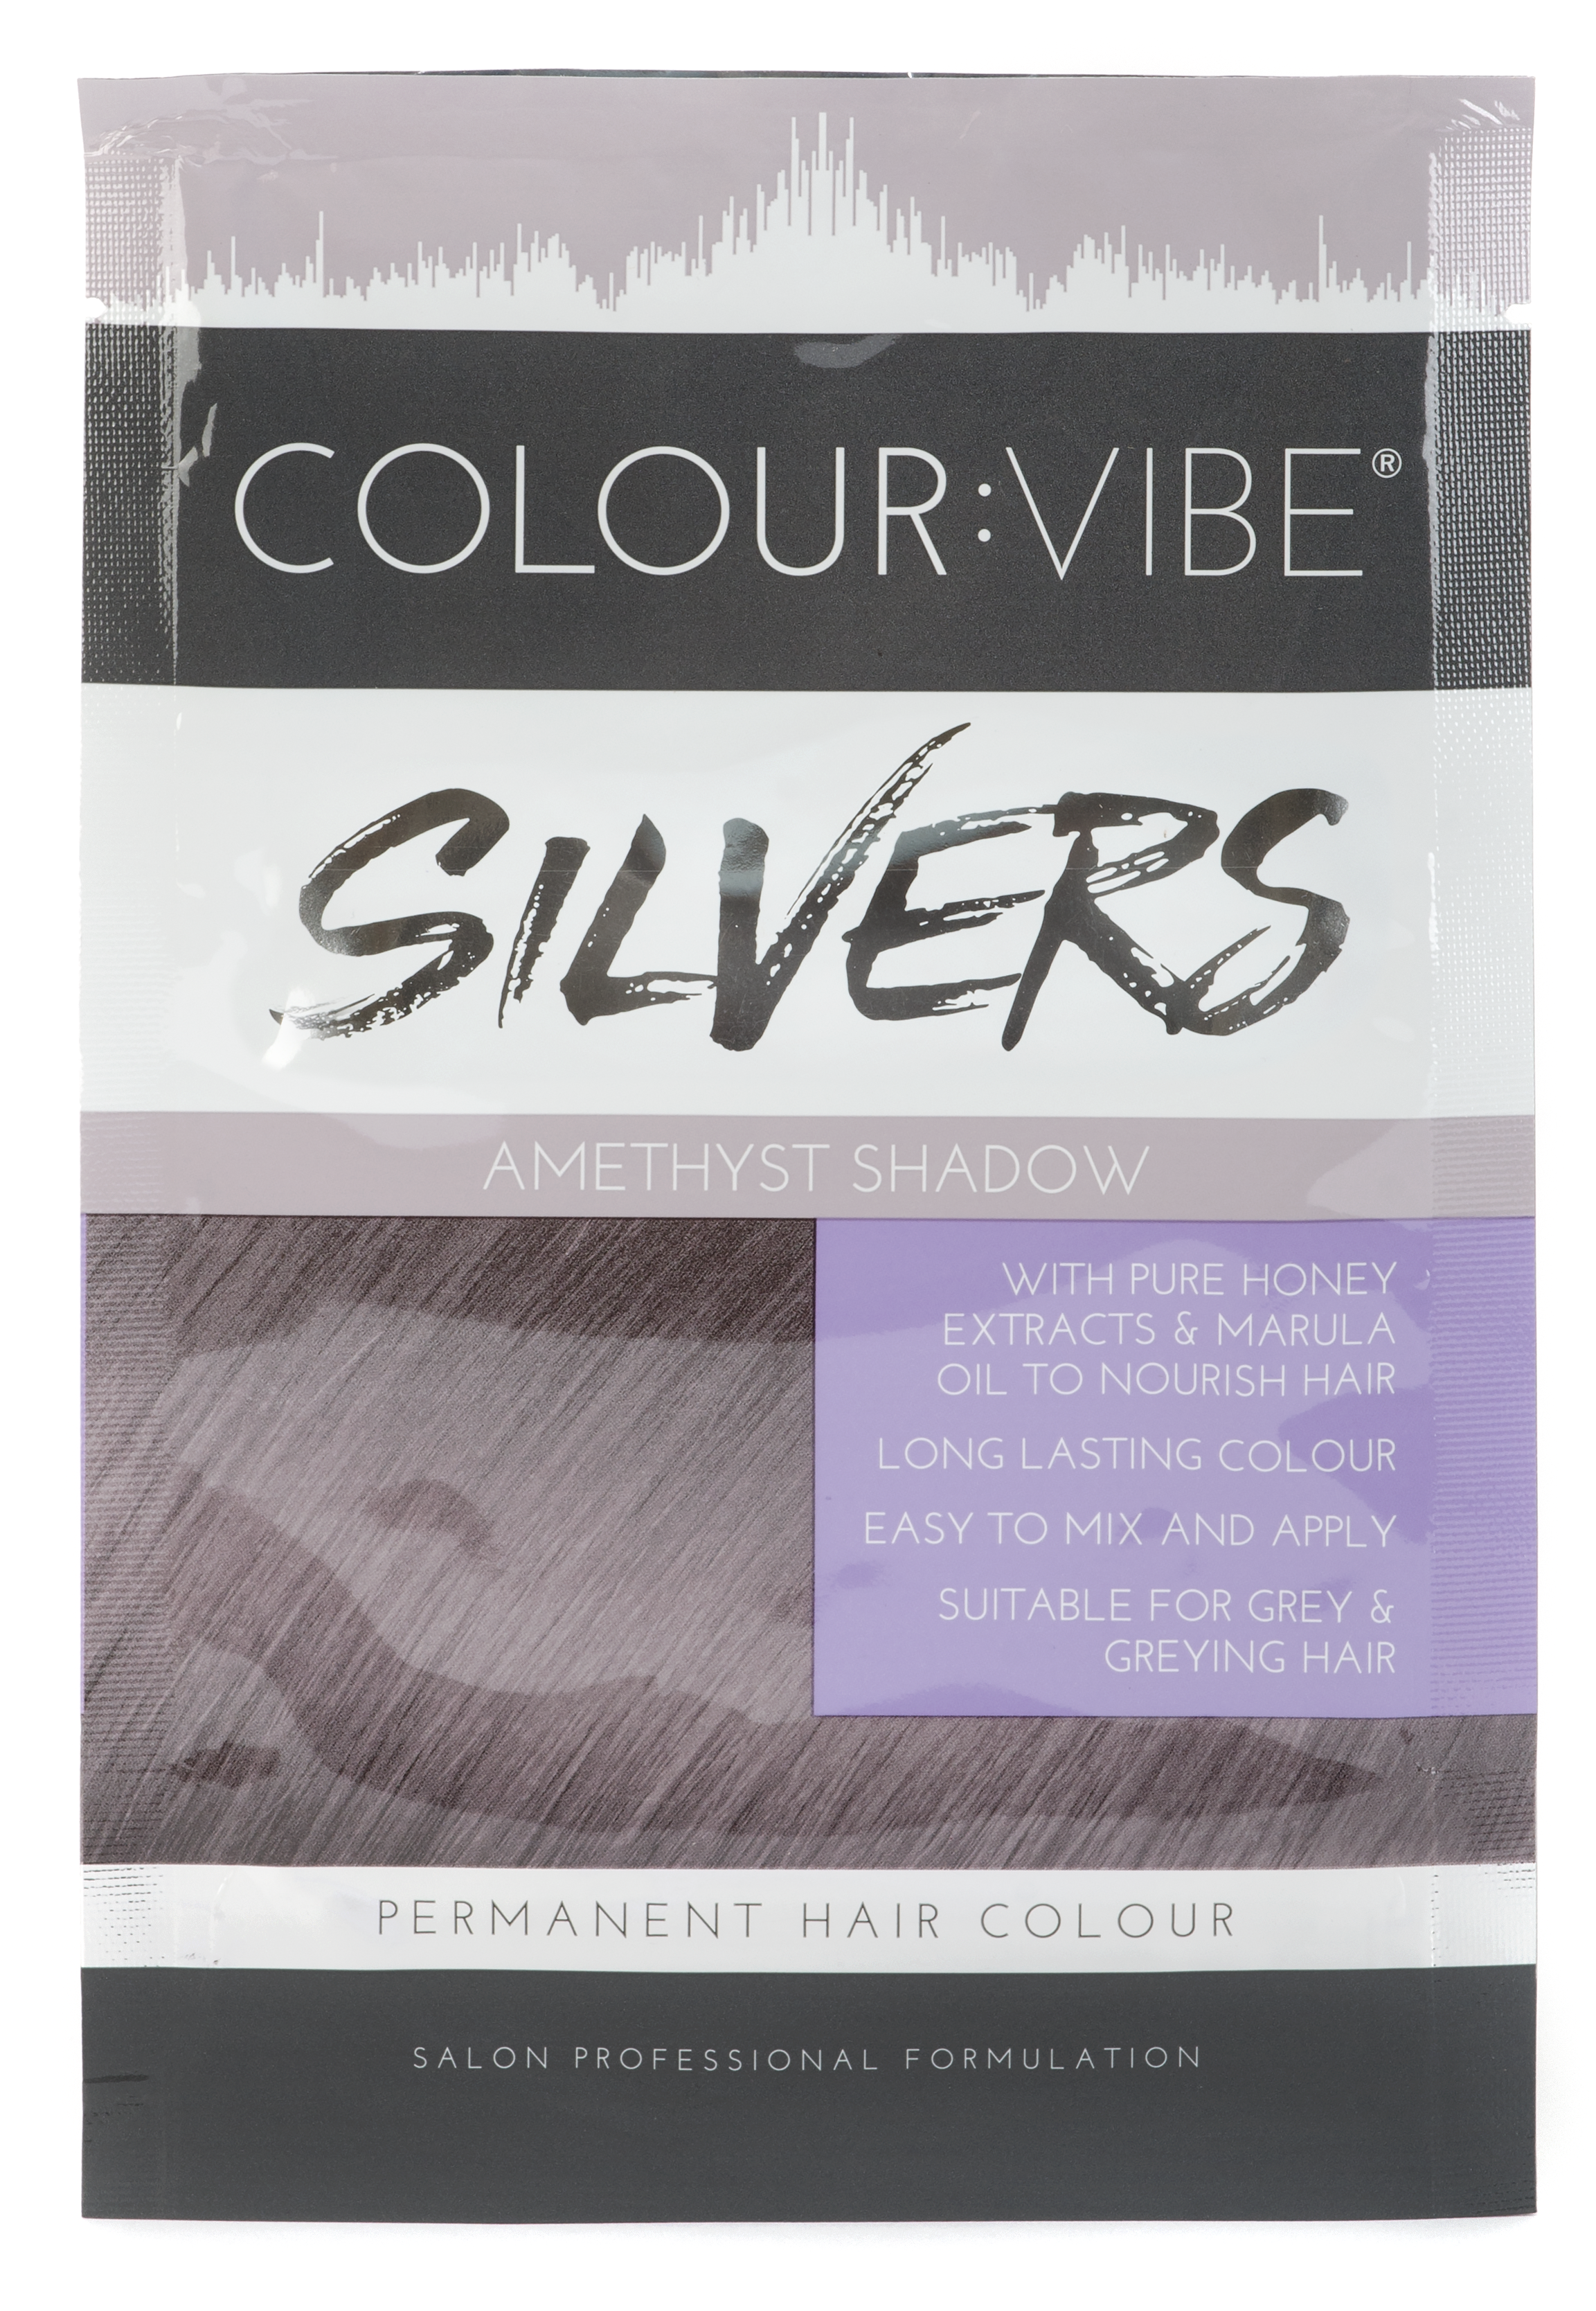 Colour:Vibe Silvers Permanent Amethyst Shadow